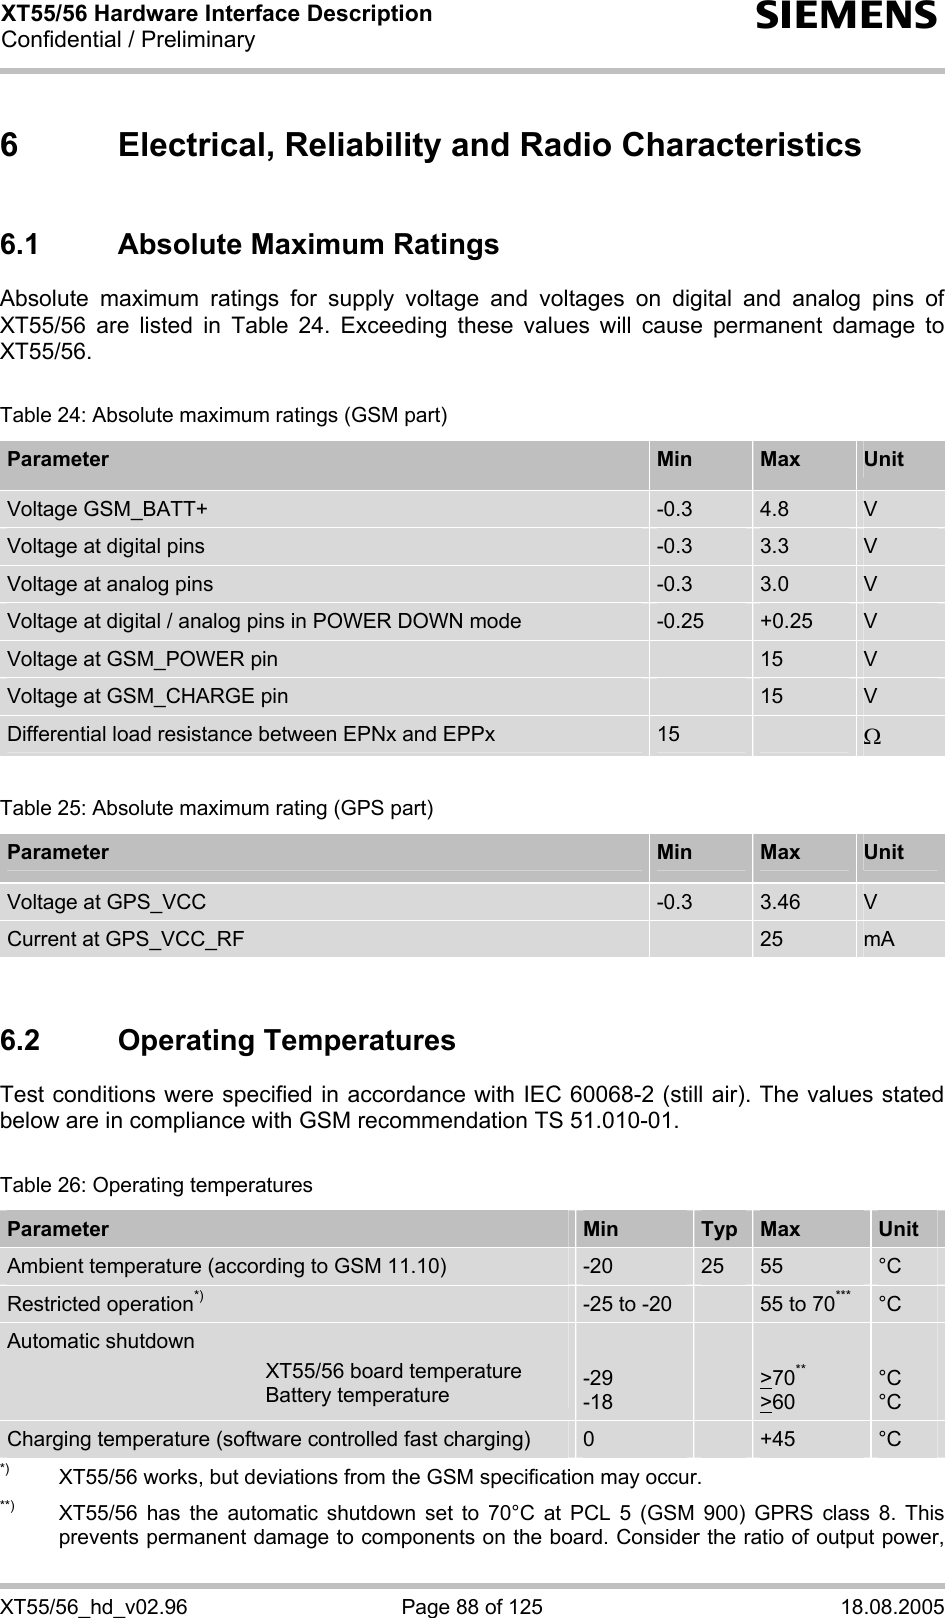 XT55/56 Hardware Interface Description Confidential / Preliminary s XT55/56_hd_v02.96  Page 88 of 125  18.08.2005 6  Electrical, Reliability and Radio Characteristics 6.1  Absolute Maximum Ratings Absolute maximum ratings for supply voltage and voltages on digital and analog pins of XT55/56 are listed in Table 24. Exceeding these values will cause permanent damage to XT55/56.  Table 24: Absolute maximum ratings (GSM part) Parameter  Min  Max  Unit Voltage GSM_BATT+  -0.3  4.8  V Voltage at digital pins   -0.3  3.3  V Voltage at analog pins   -0.3  3.0  V Voltage at digital / analog pins in POWER DOWN mode  -0.25  +0.25  V Voltage at GSM_POWER pin   15  V Voltage at GSM_CHARGE pin   15  V Differential load resistance between EPNx and EPPx  15   Ω  Table 25: Absolute maximum rating (GPS part) Parameter  Min  Max  Unit Voltage at GPS_VCC  -0.3  3.46  V Current at GPS_VCC_RF   25  mA  6.2 Operating Temperatures Test conditions were specified in accordance with IEC 60068-2 (still air). The values stated below are in compliance with GSM recommendation TS 51.010-01.  Table 26: Operating temperatures Parameter  Min  Typ  Max  Unit Ambient temperature (according to GSM 11.10)  -20  25  55  °C Restricted operation*) -25 to -20   55 to 70*** °C Automatic shutdown   XT55/56 board temperature   Battery temperature  -29 -18    &gt;70** &gt;60  °C °C Charging temperature (software controlled fast charging)  0   +45  °C *)  XT55/56 works, but deviations from the GSM specification may occur. **)   XT55/56 has the automatic shutdown set to 70°C at PCL 5 (GSM 900) GPRS class 8. This prevents permanent damage to components on the board. Consider the ratio of output power, 